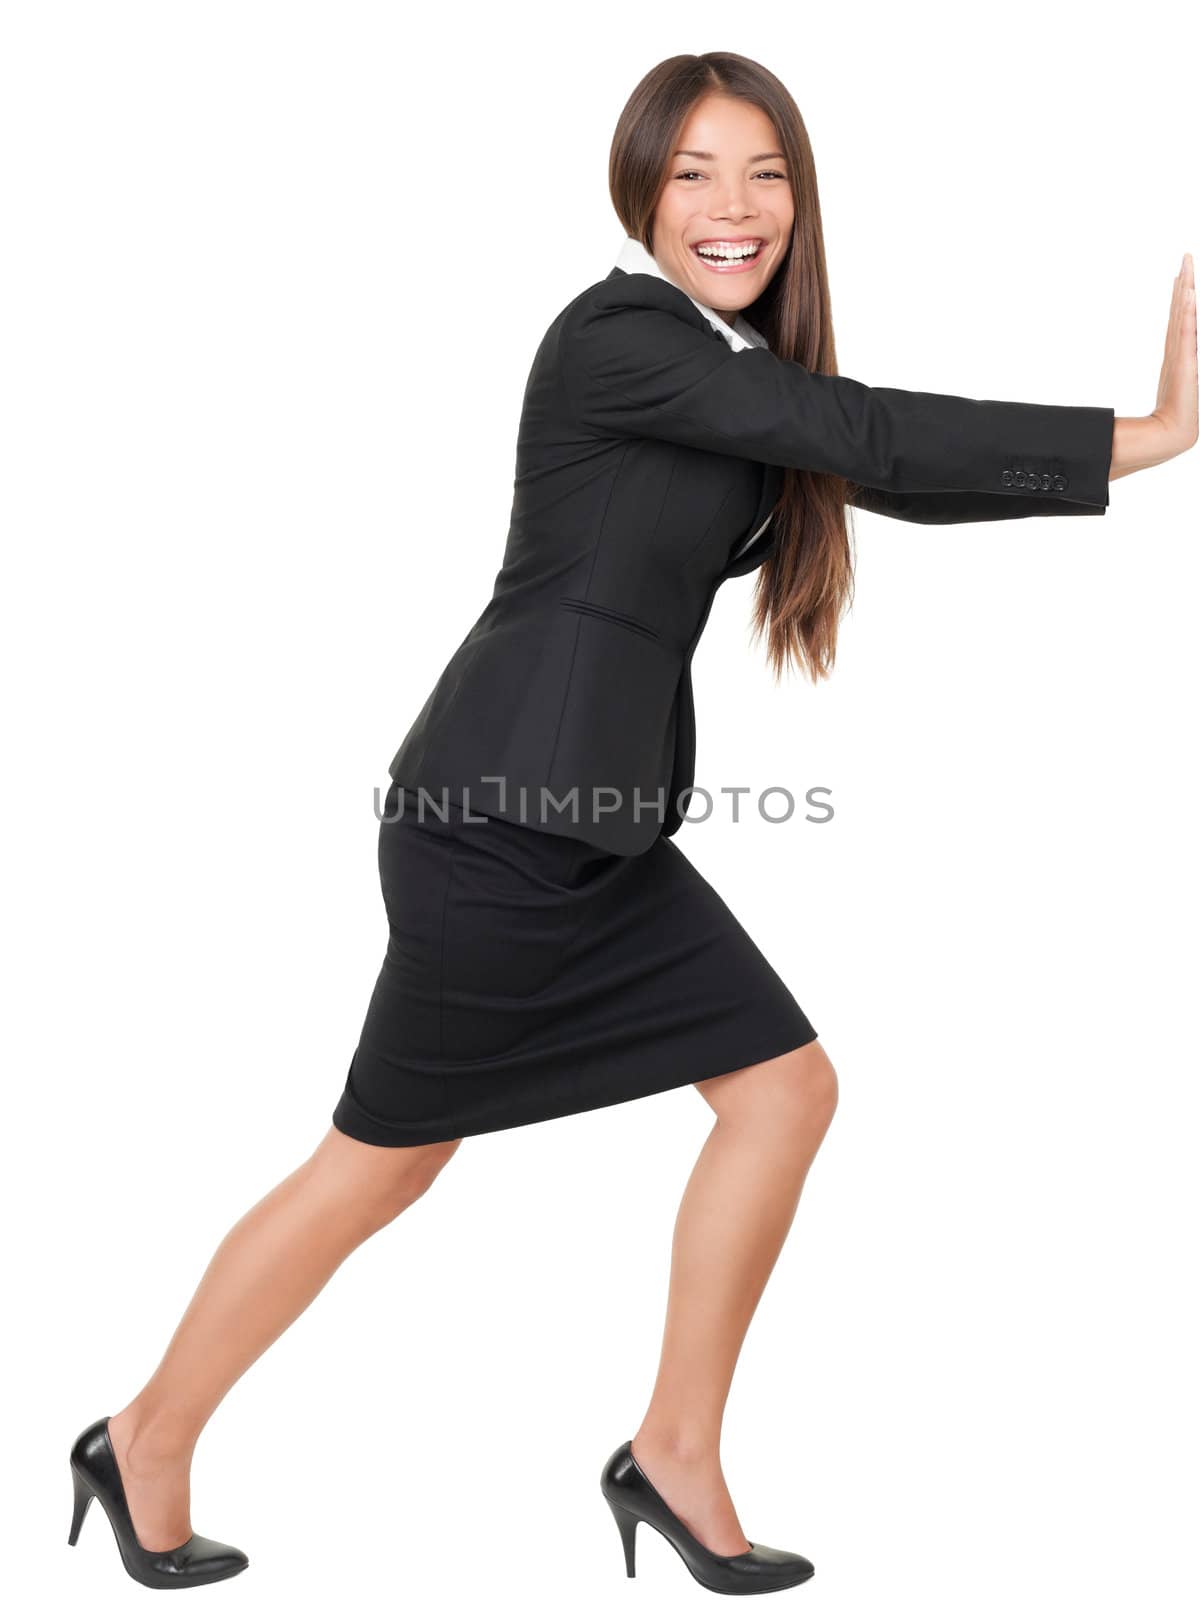 Woman pushing or leaning on wall. Beautiful asian woman smiling isolated on white background in full length.